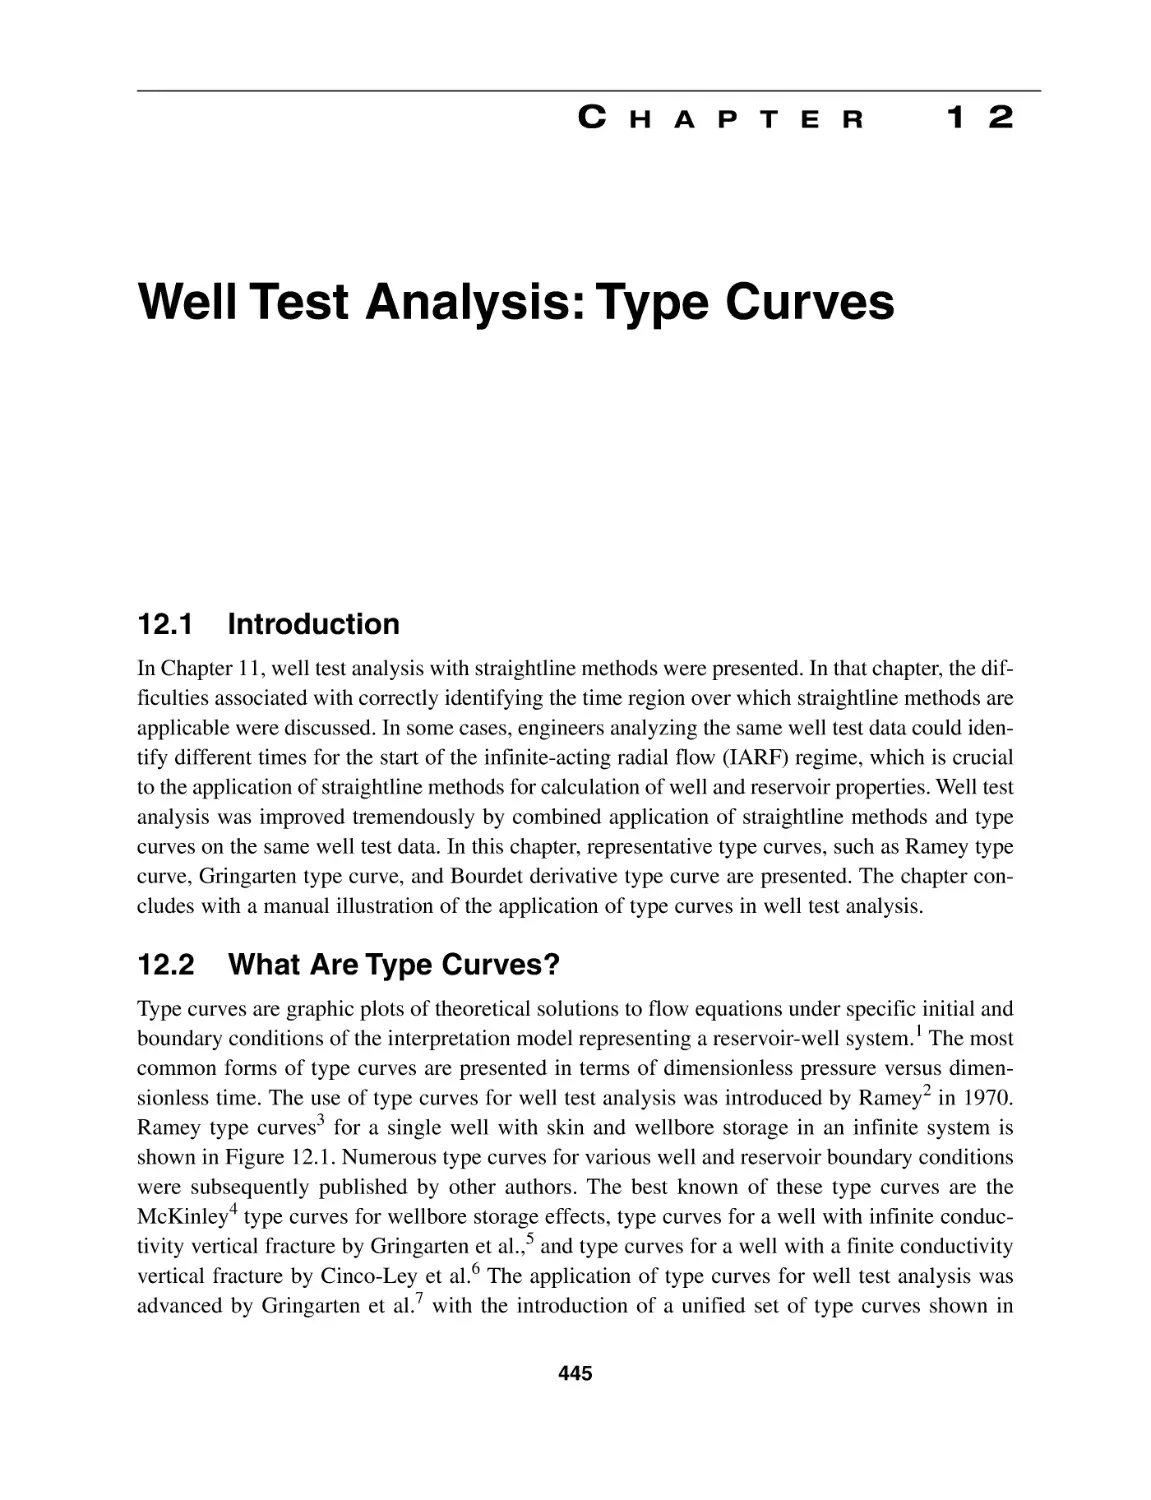 Chapter 12 Well Test Analysis
12.1 Introduction
12.2 What Are Type Curves?